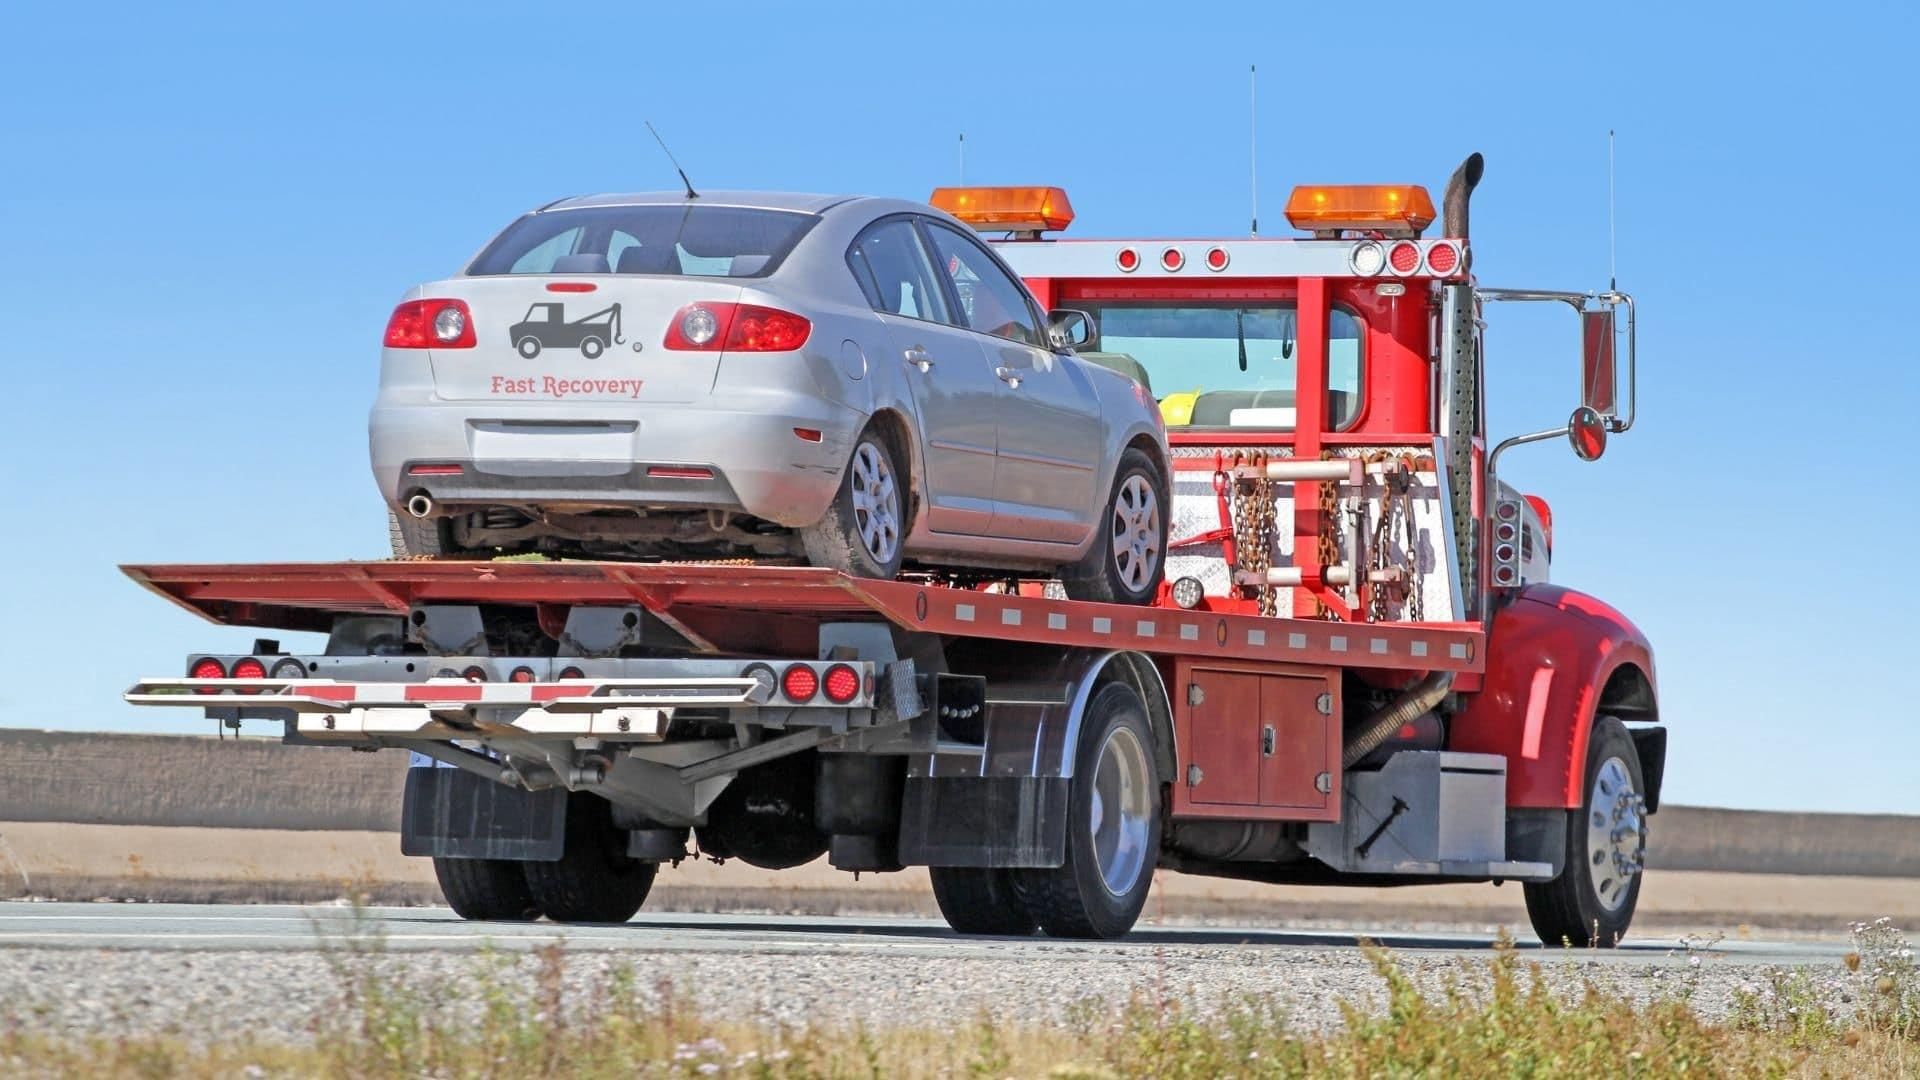 ​The top five reasons for calling a Dublin tow truck